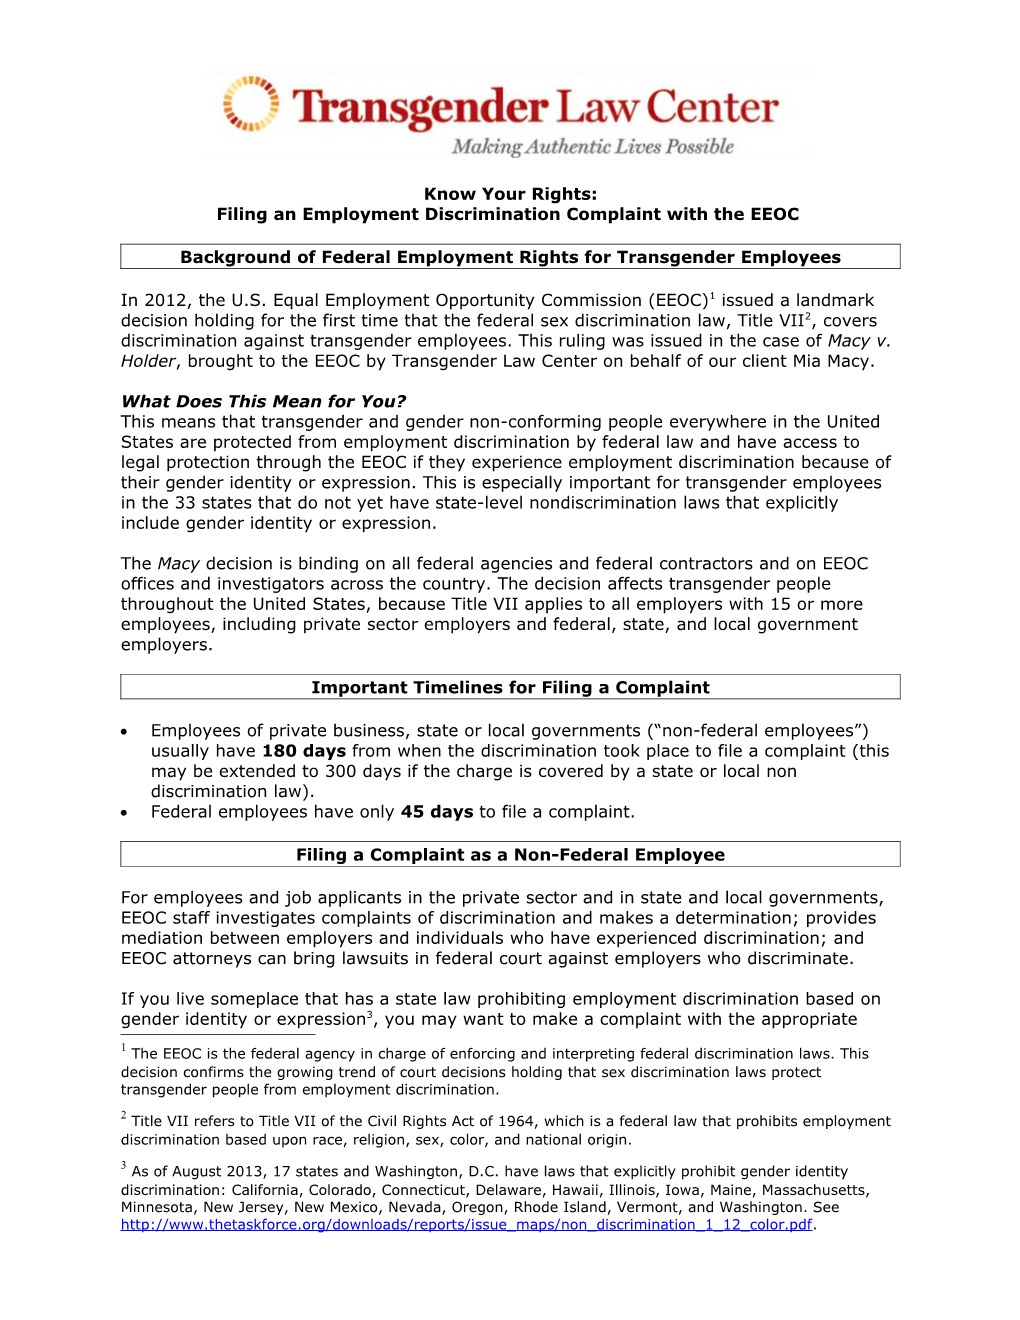 Filing an Employment Discrimination Complaint with the EEOC